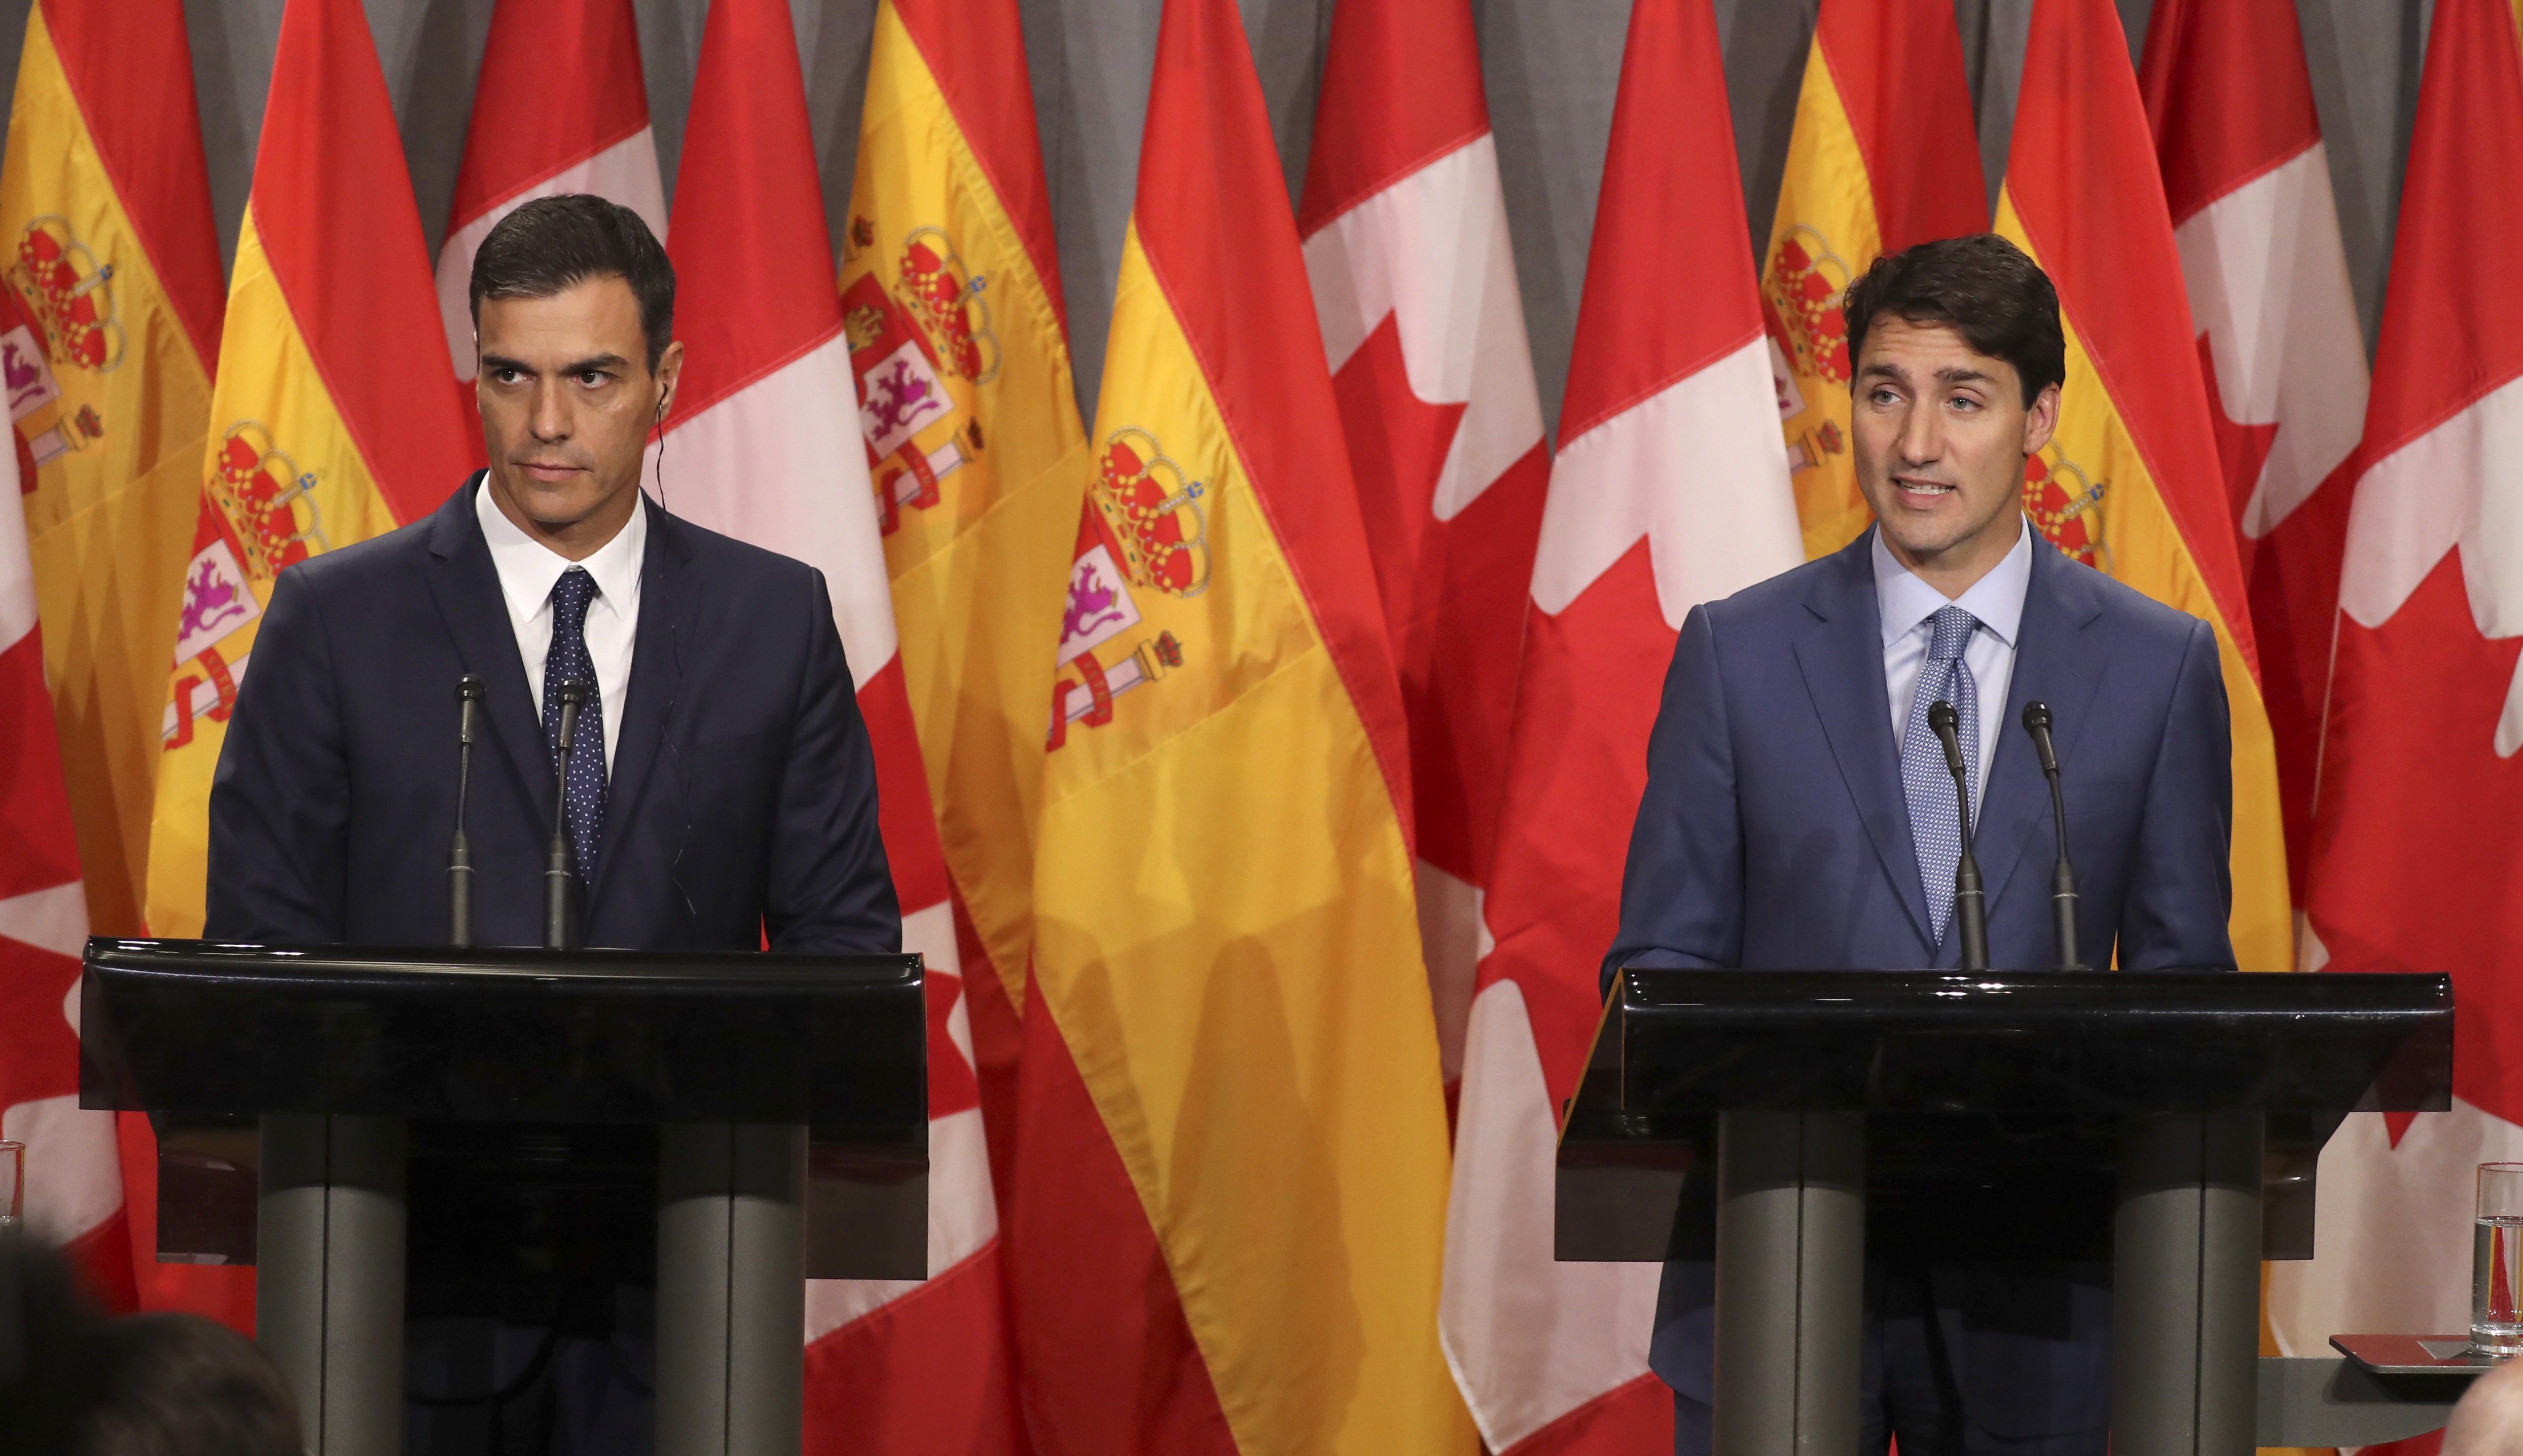 Trudeau recommends Sánchez "talk" (to solve the Catalan issue)